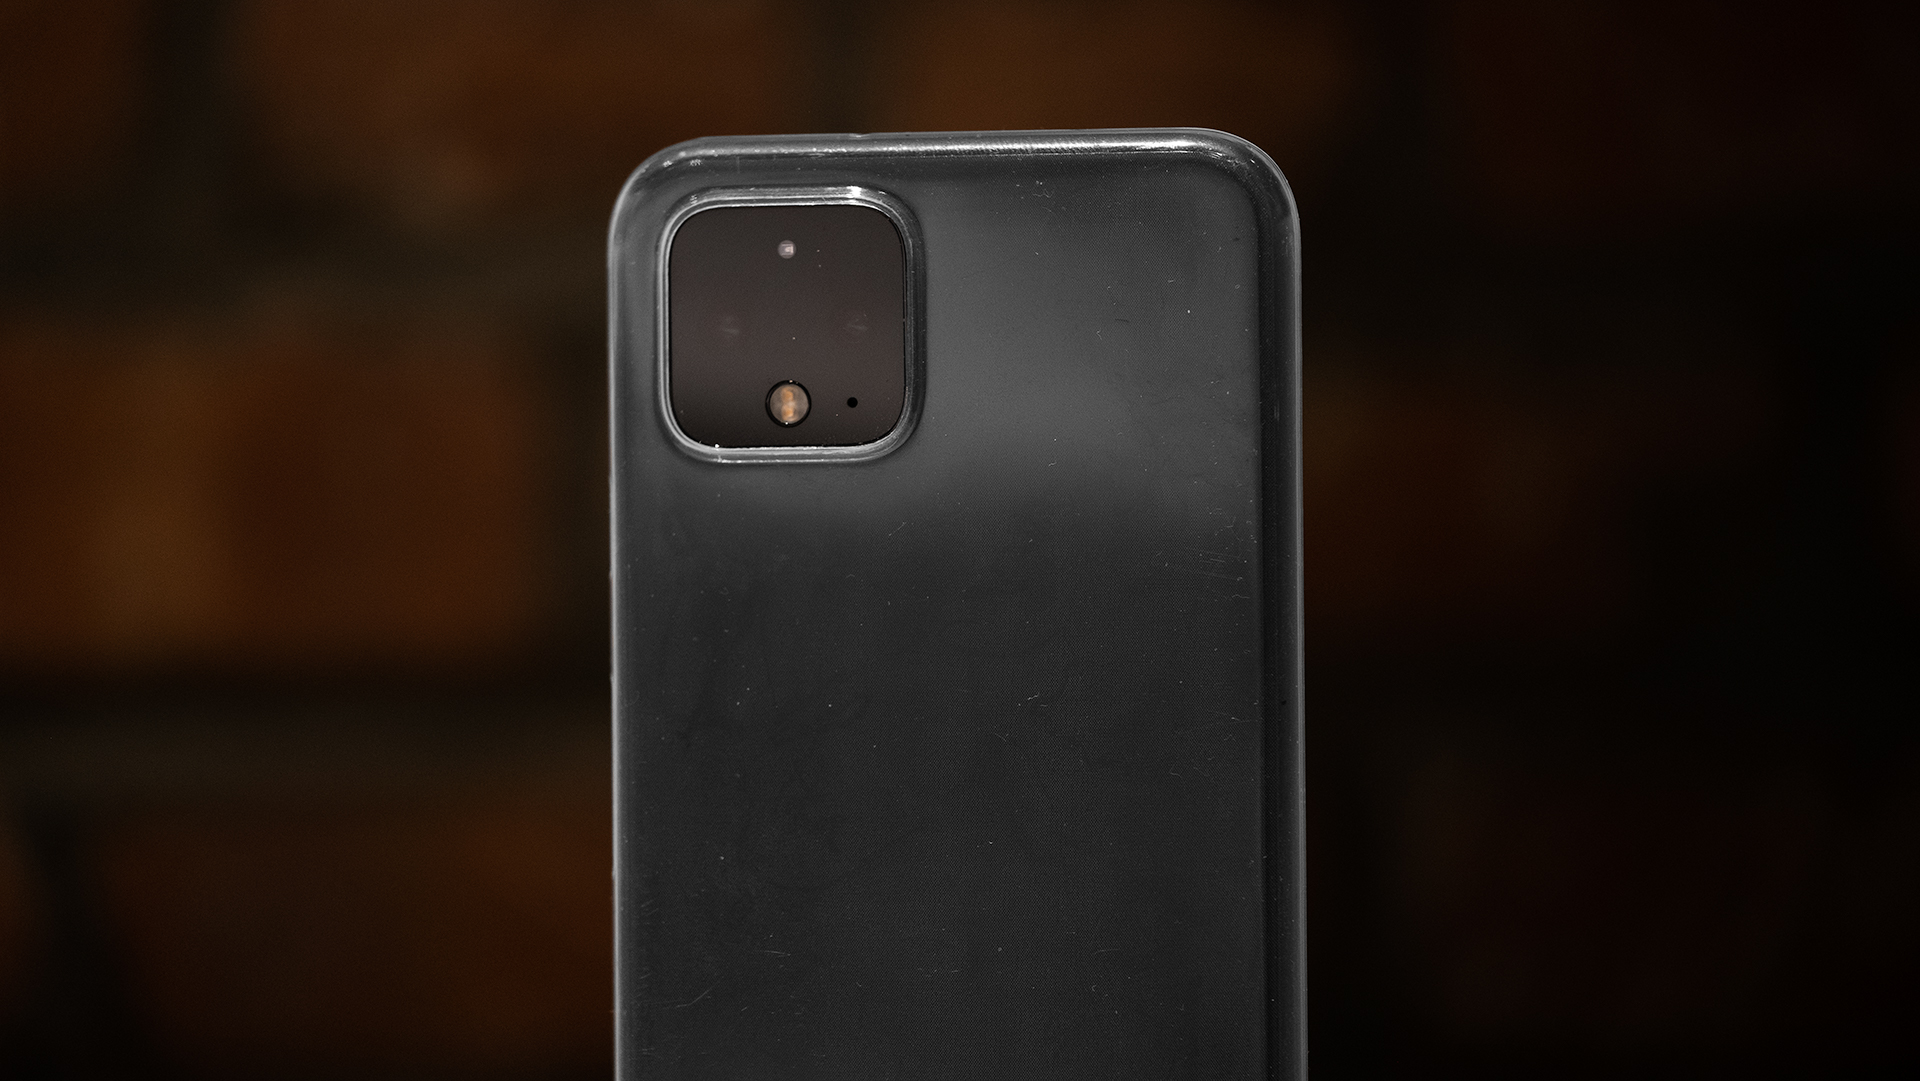 Pixel 4 in clear MNML case standing upright against brick